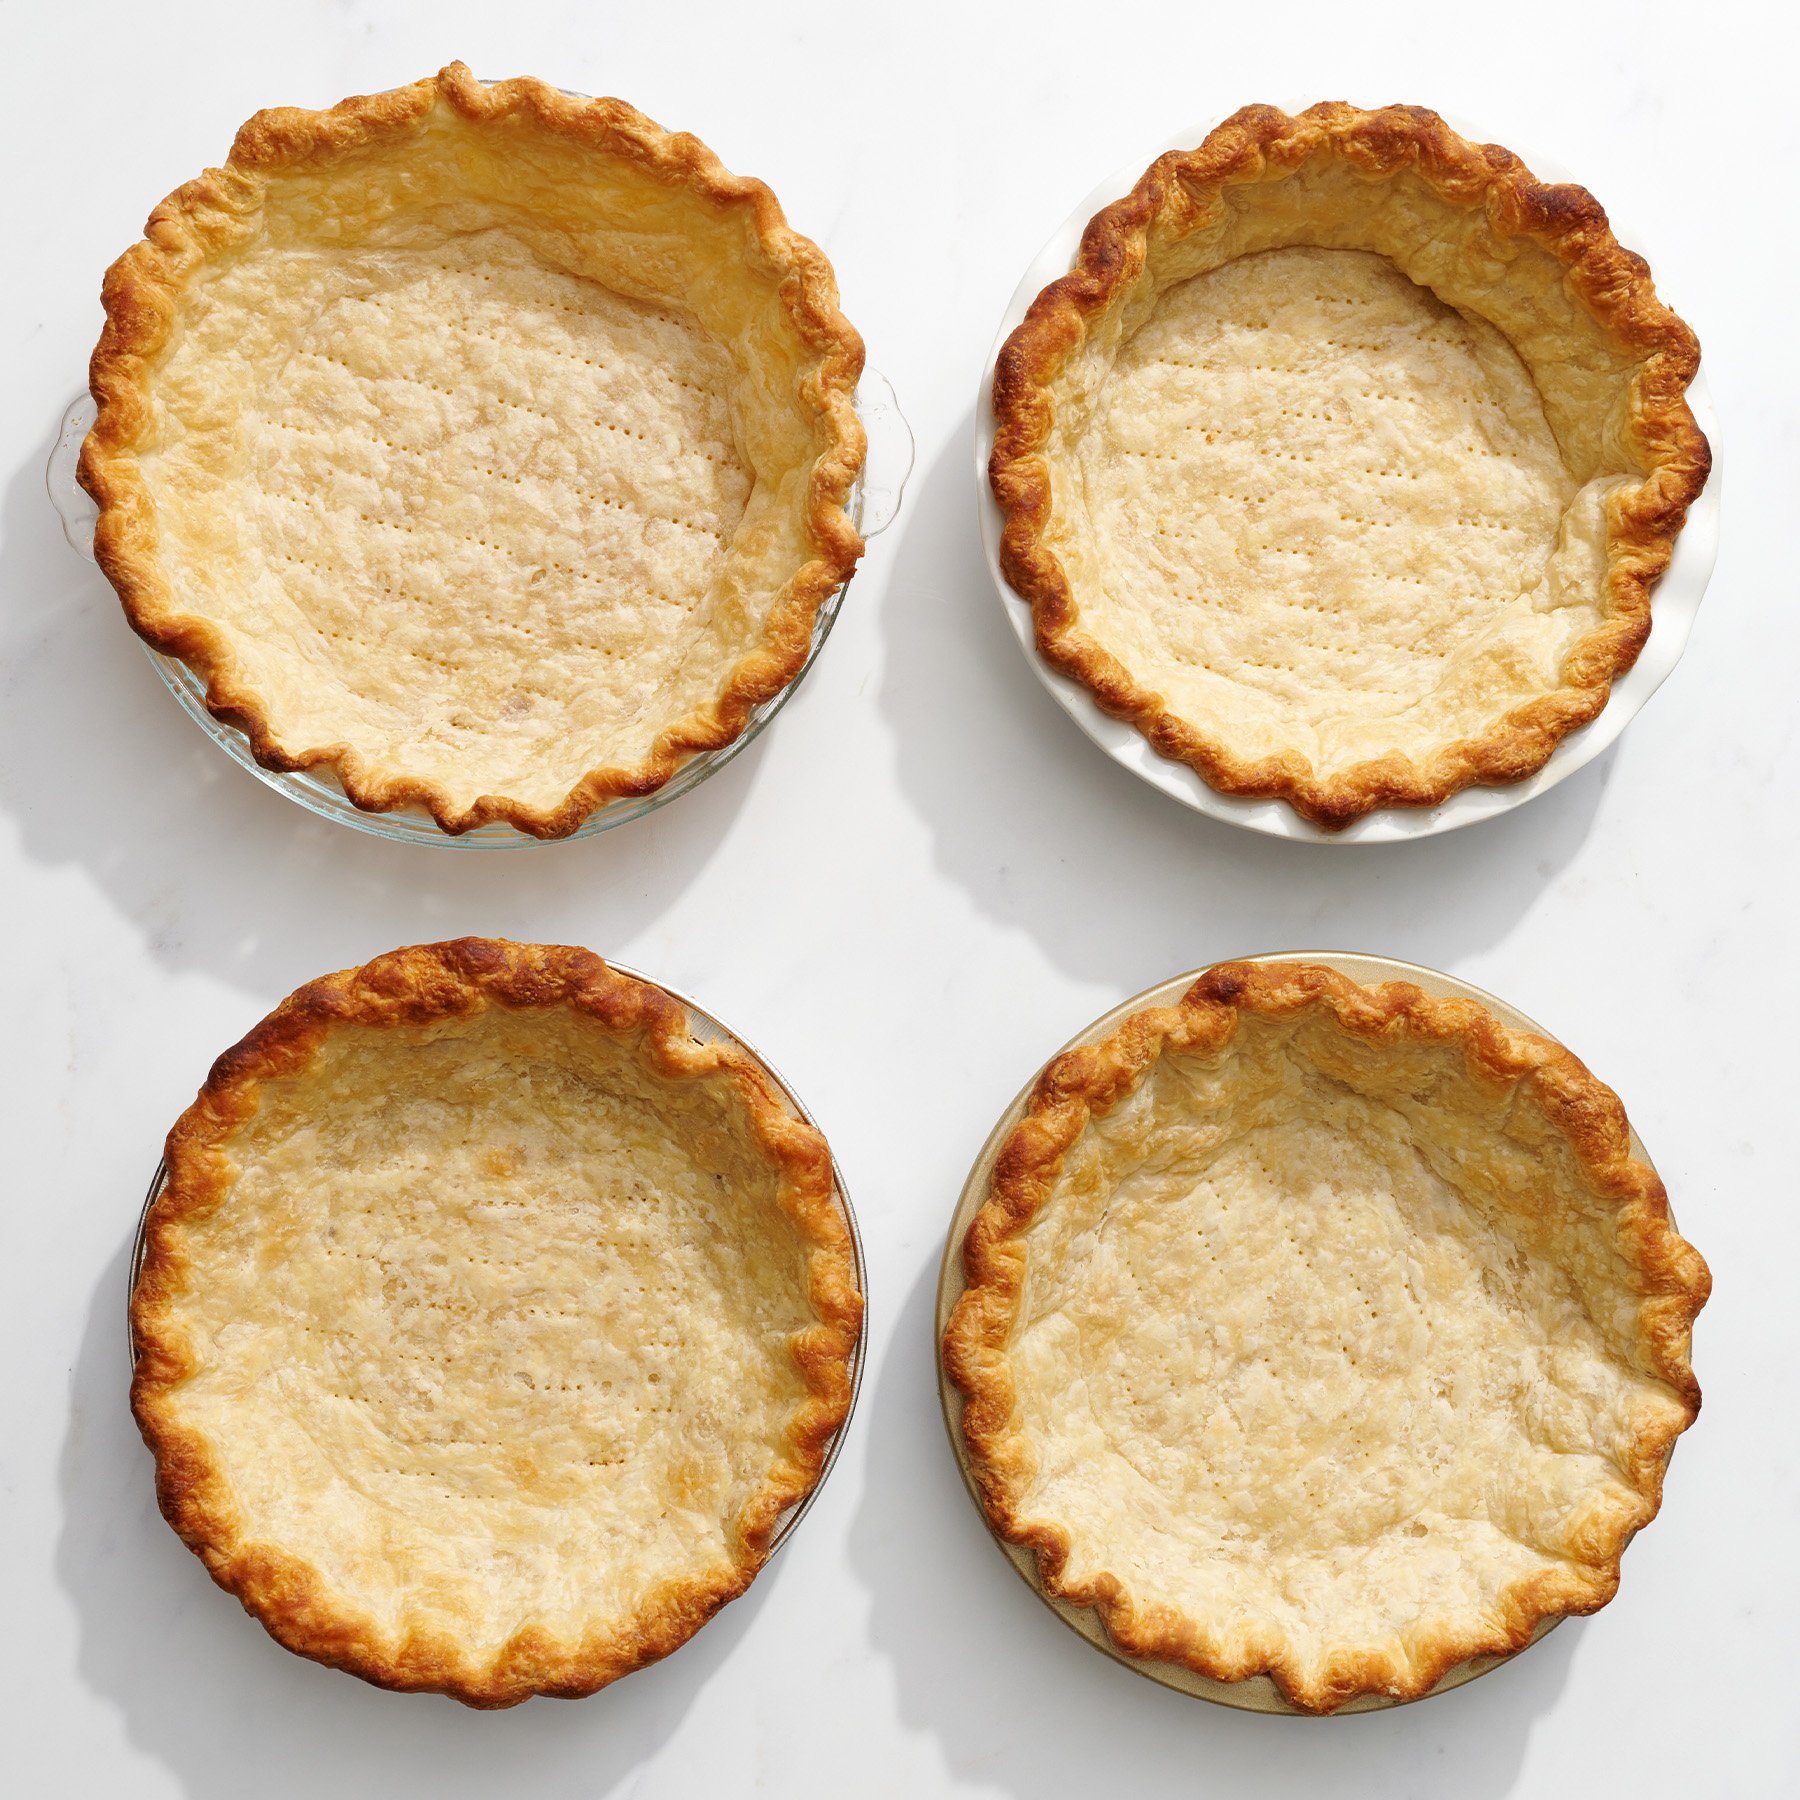 comparison of pie crusts baked in glass, ceramic, disposable, and metal pie pans